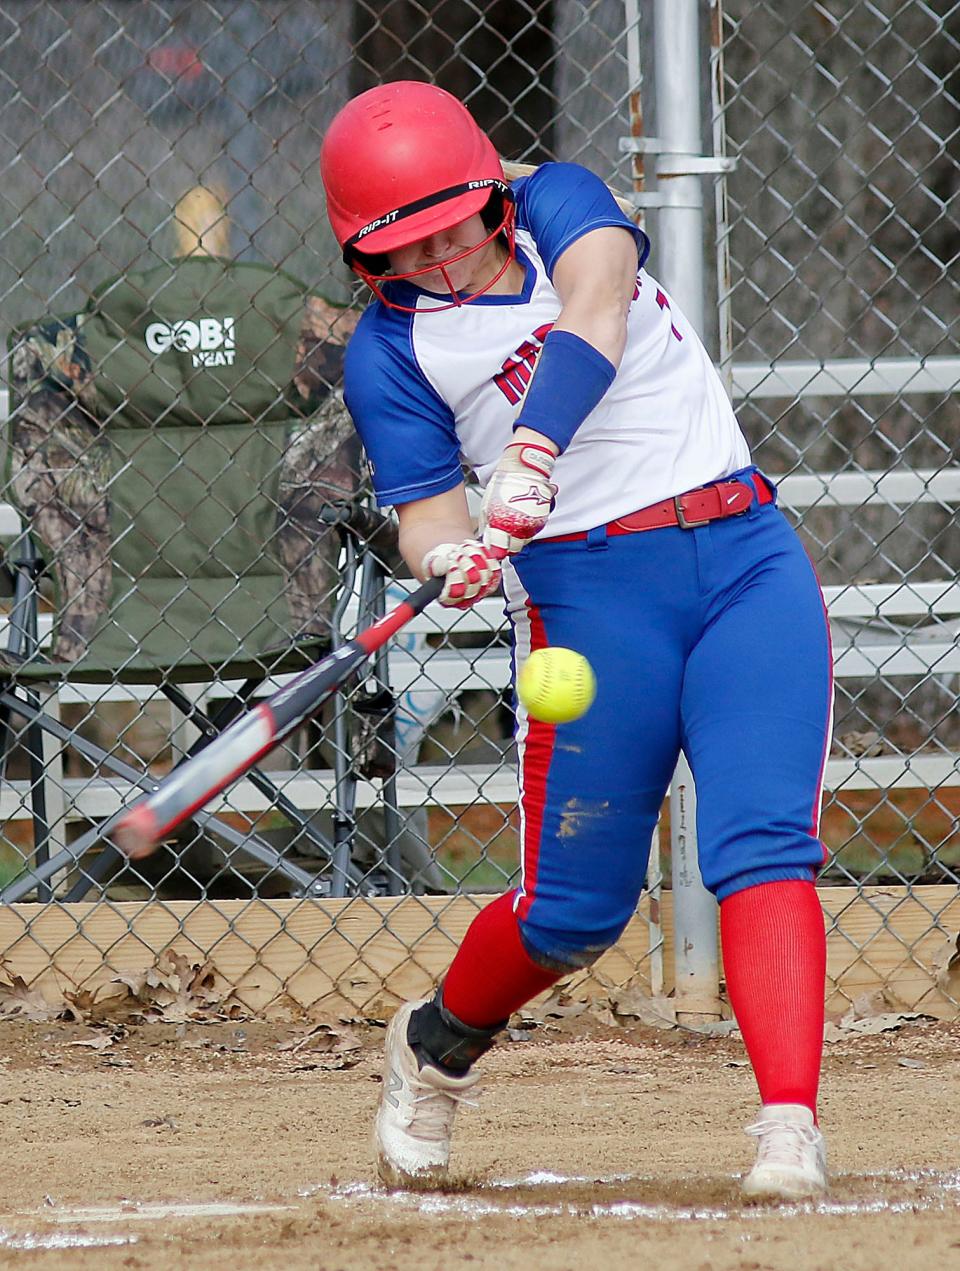 Mapleton High School's Kaylee Haines (7) connects with a pitch against Monroeville High School during high school softball action Tuesday, April 12, 2022 at Mapleton High School. TOM E. PUSKAR/TIMES-GAZETTE.COM